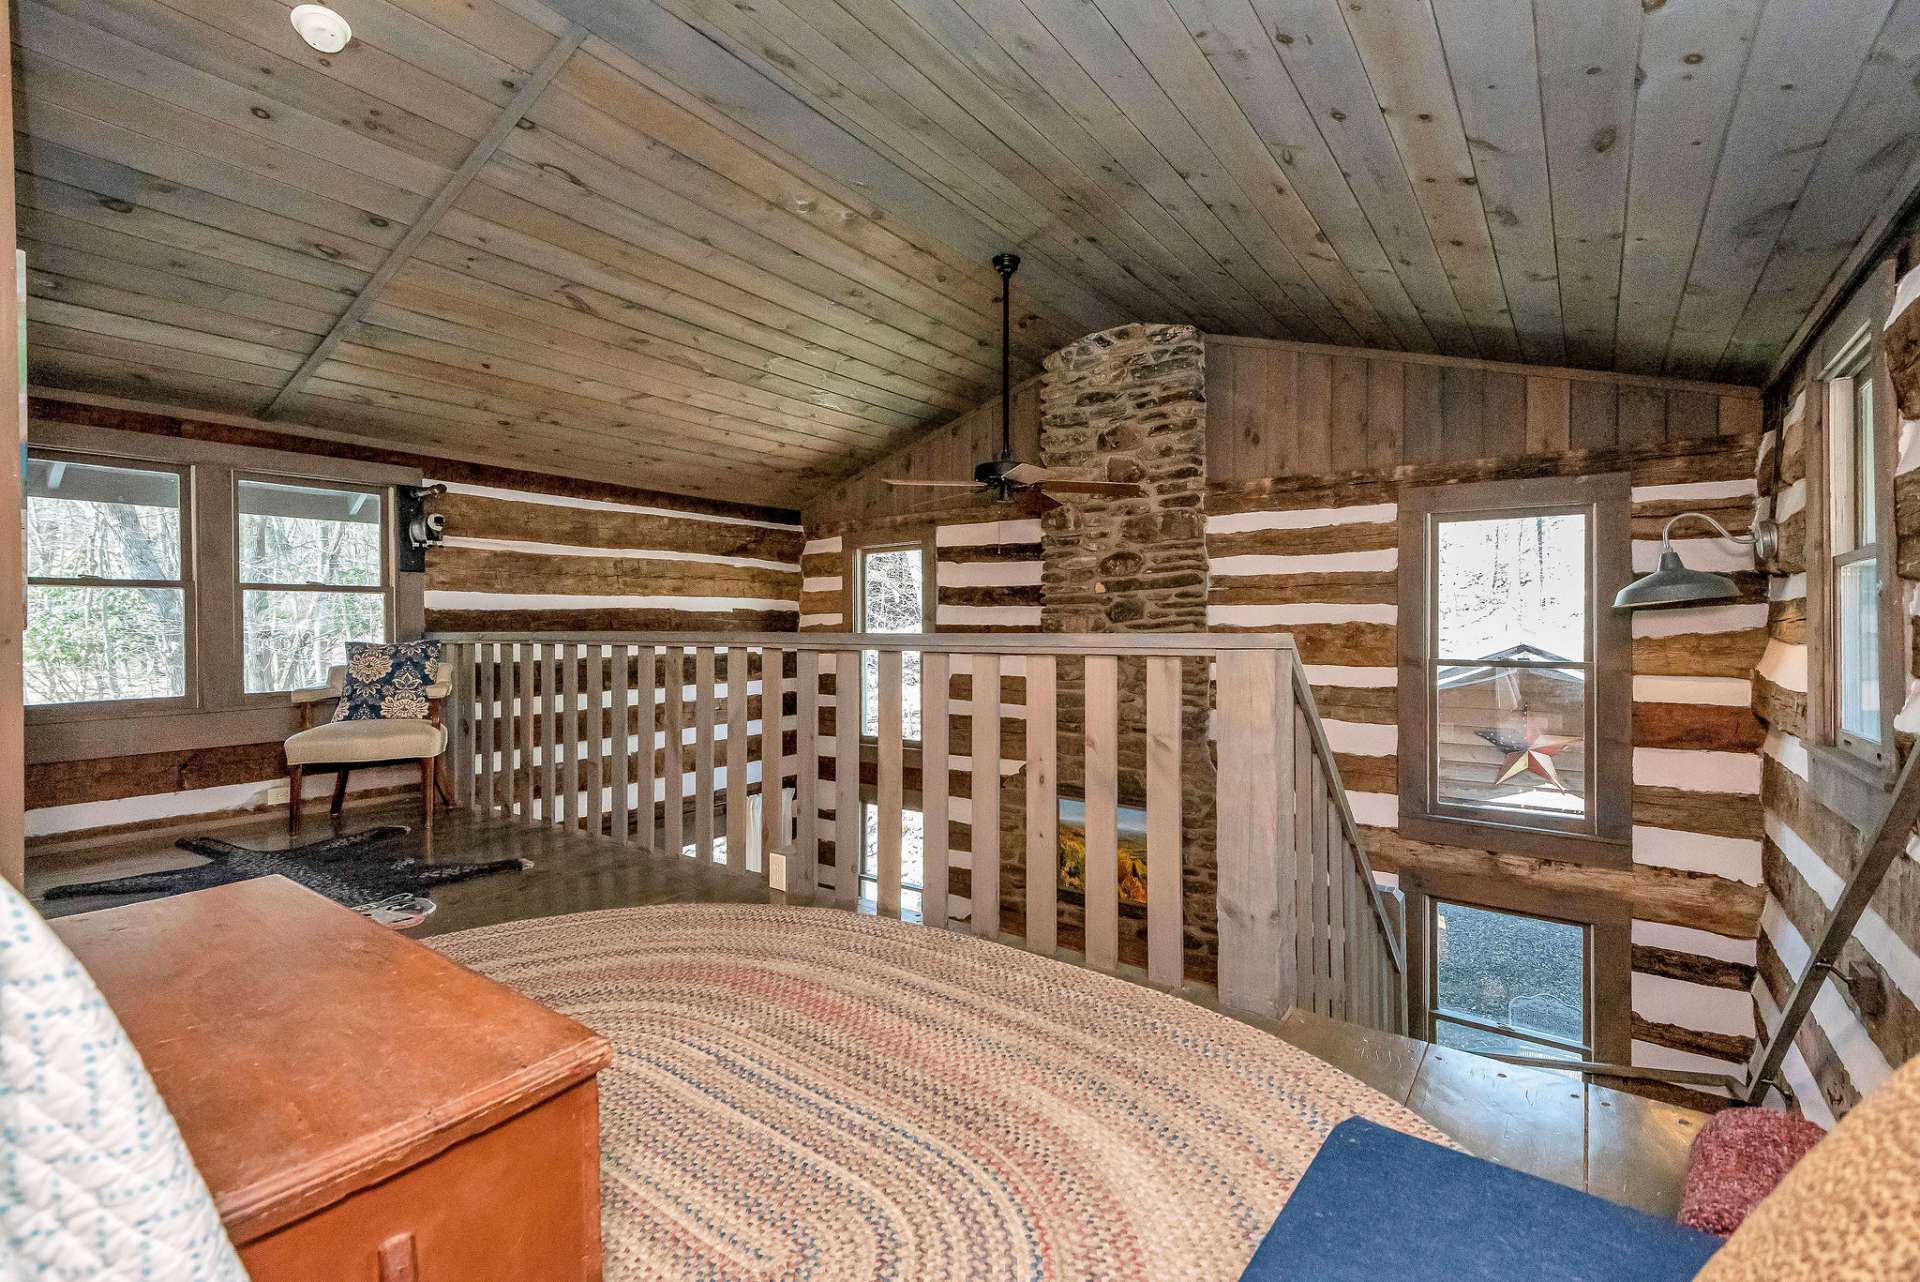 Positioned above the main living area, it offers a view of the stone fireplace and living area below. From this vantage point, occupants can enjoy the flickering warmth of the fire and the rustic ambiance of the living space